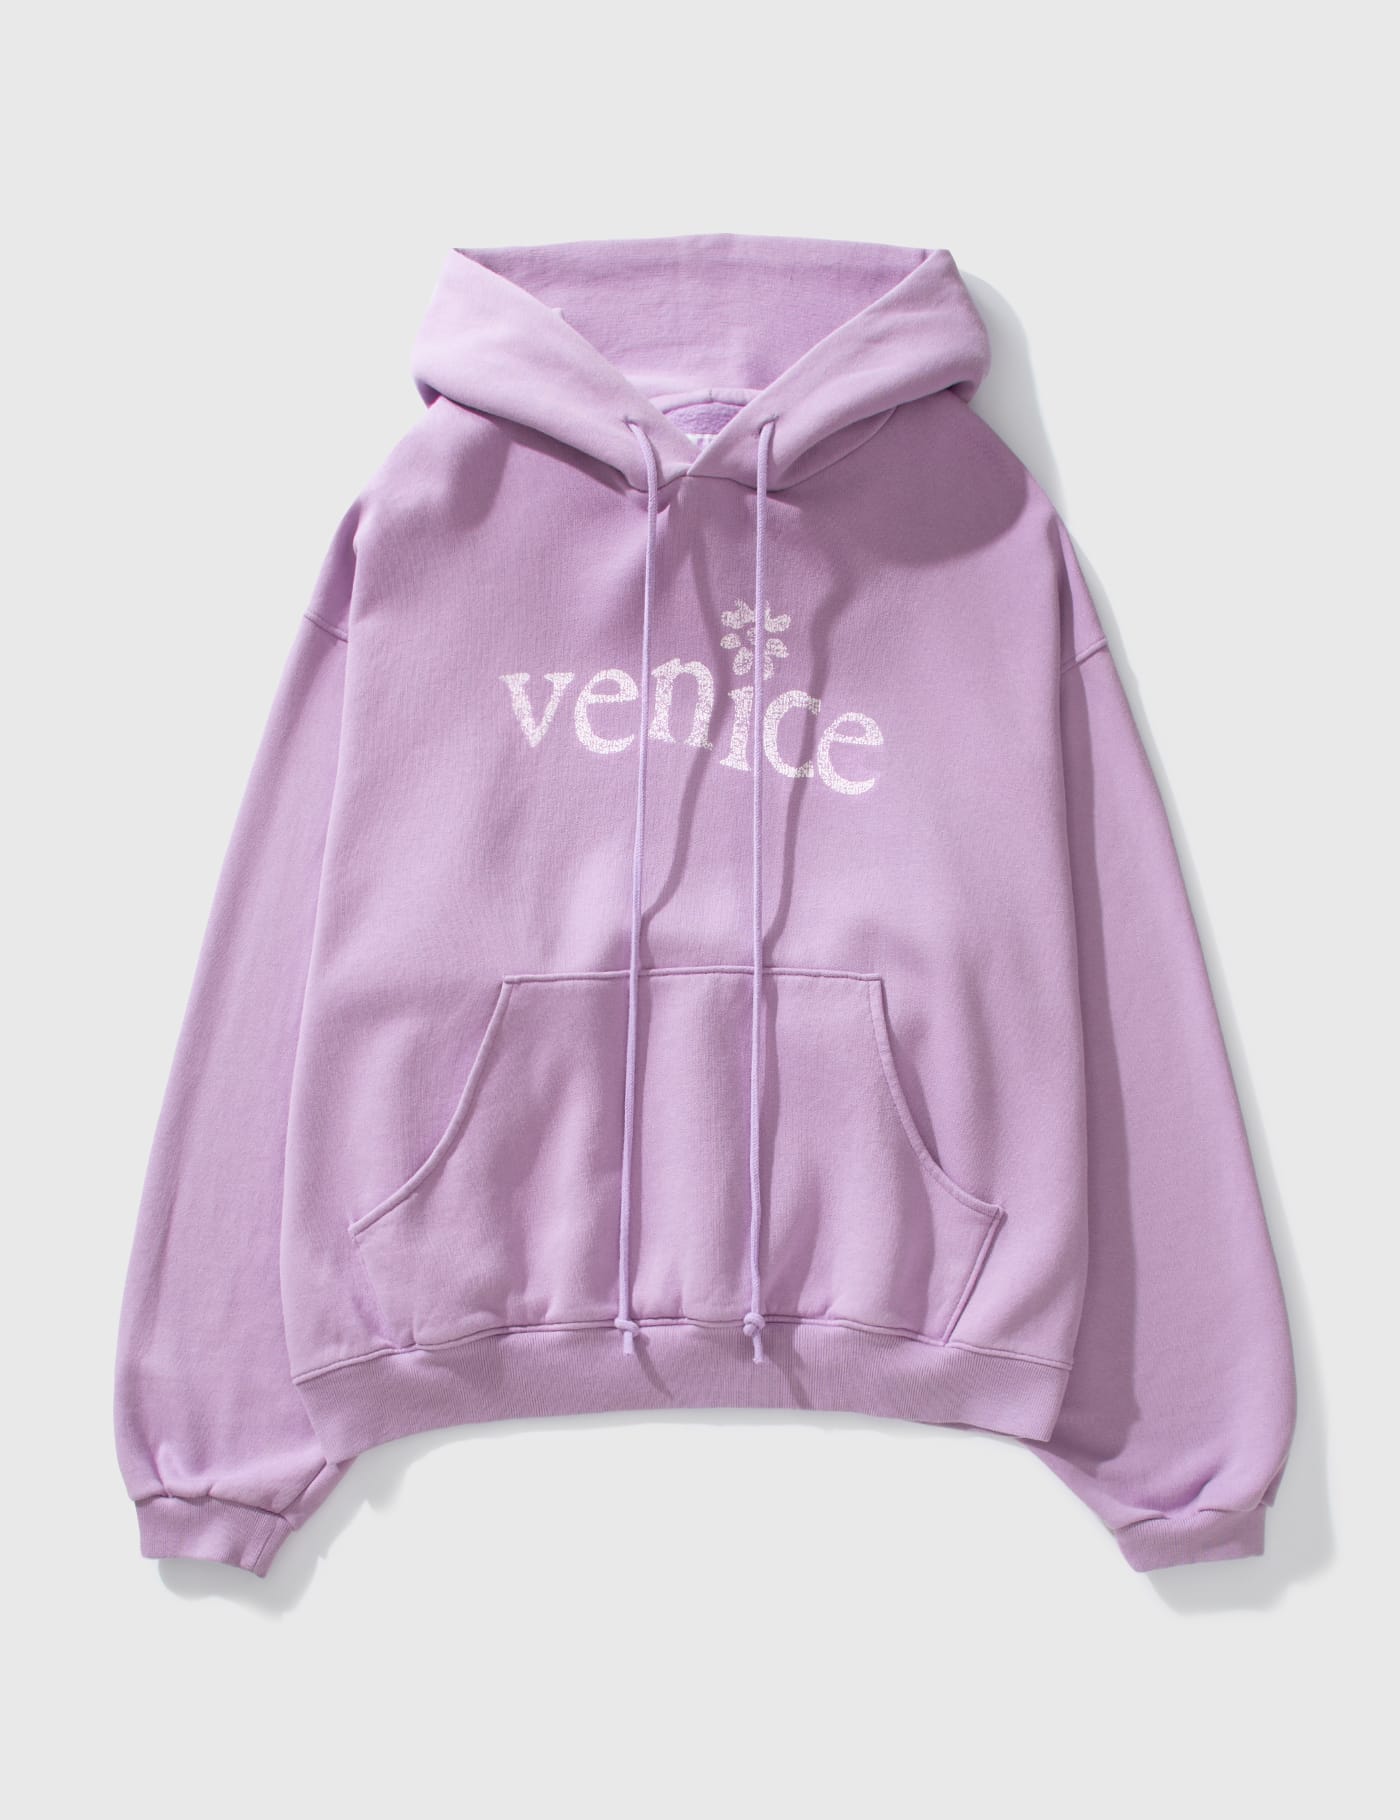 ERL - Venice Hoodie | HBX - Globally Curated Fashion and Lifestyle by  Hypebeast